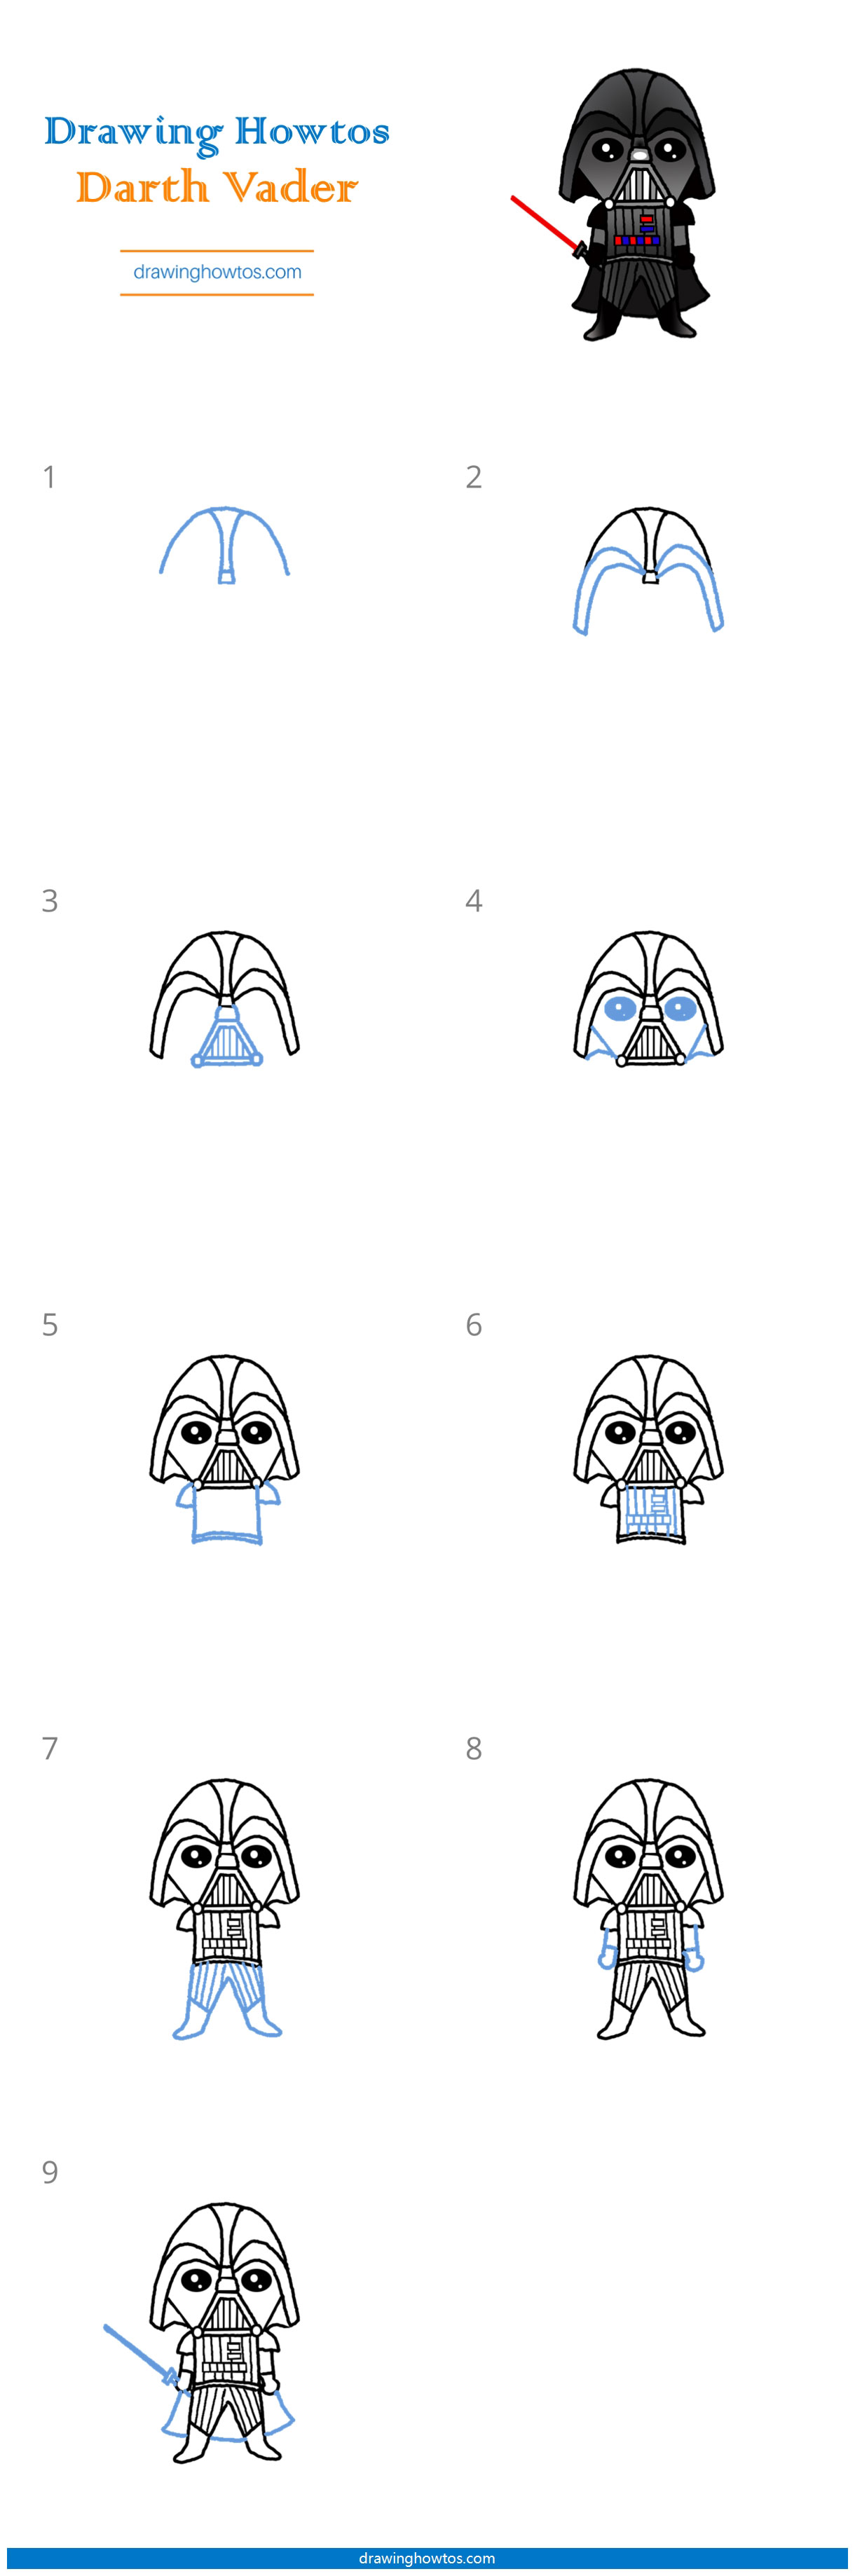 How to Draw Darth Vader Step by Step